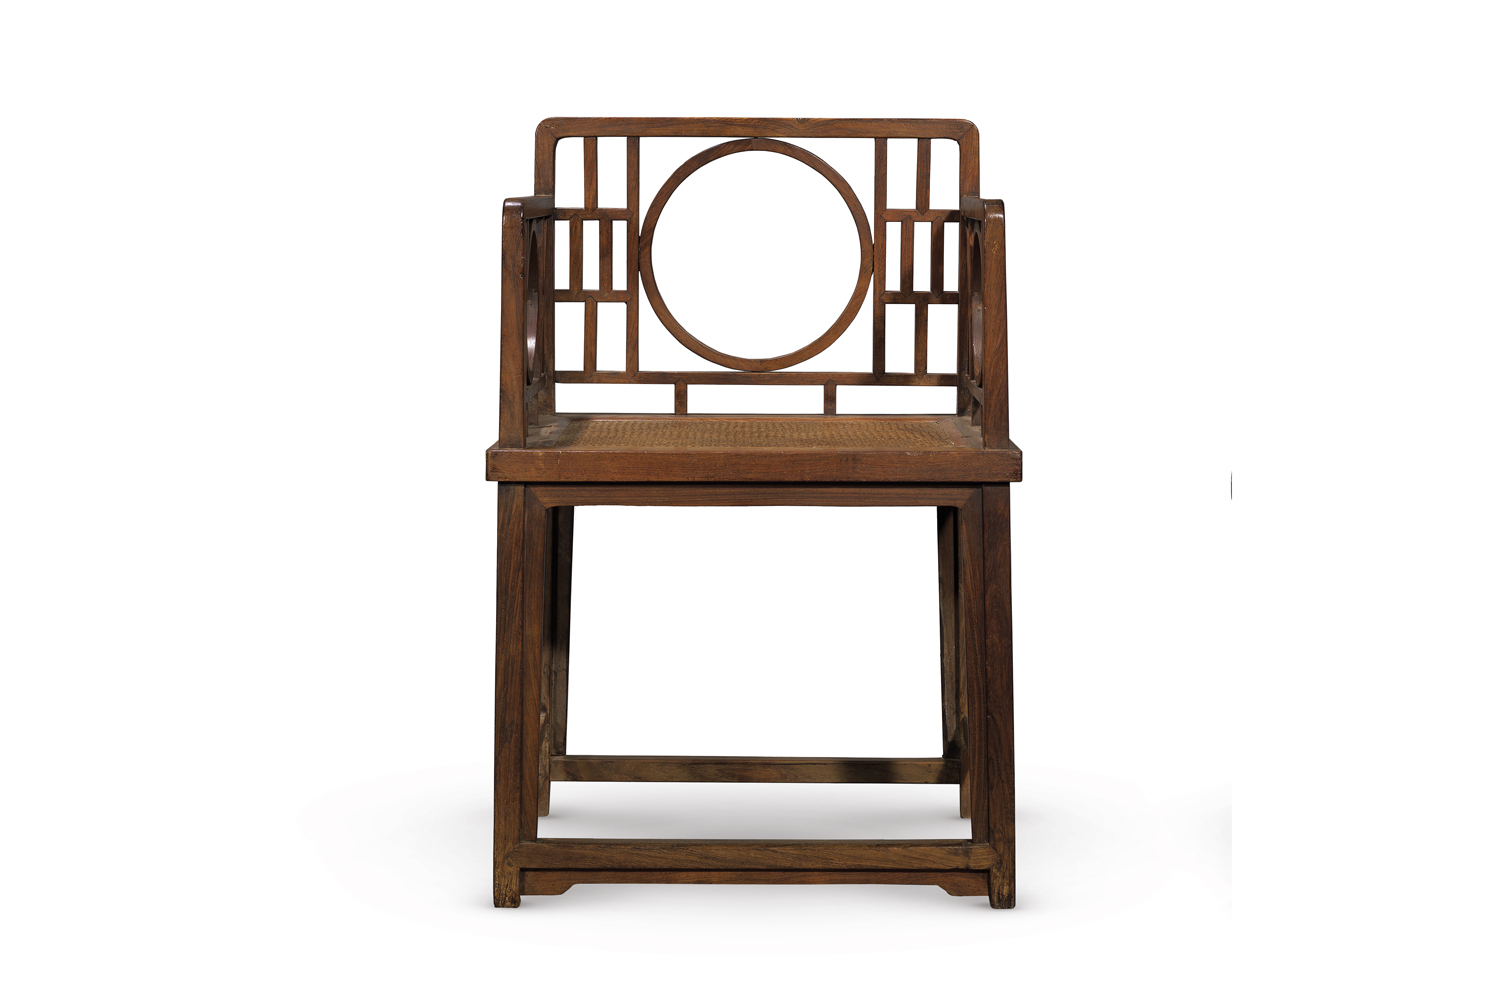 Christie’s presents rare pieces of furniture from the Ming & Qing dynasties